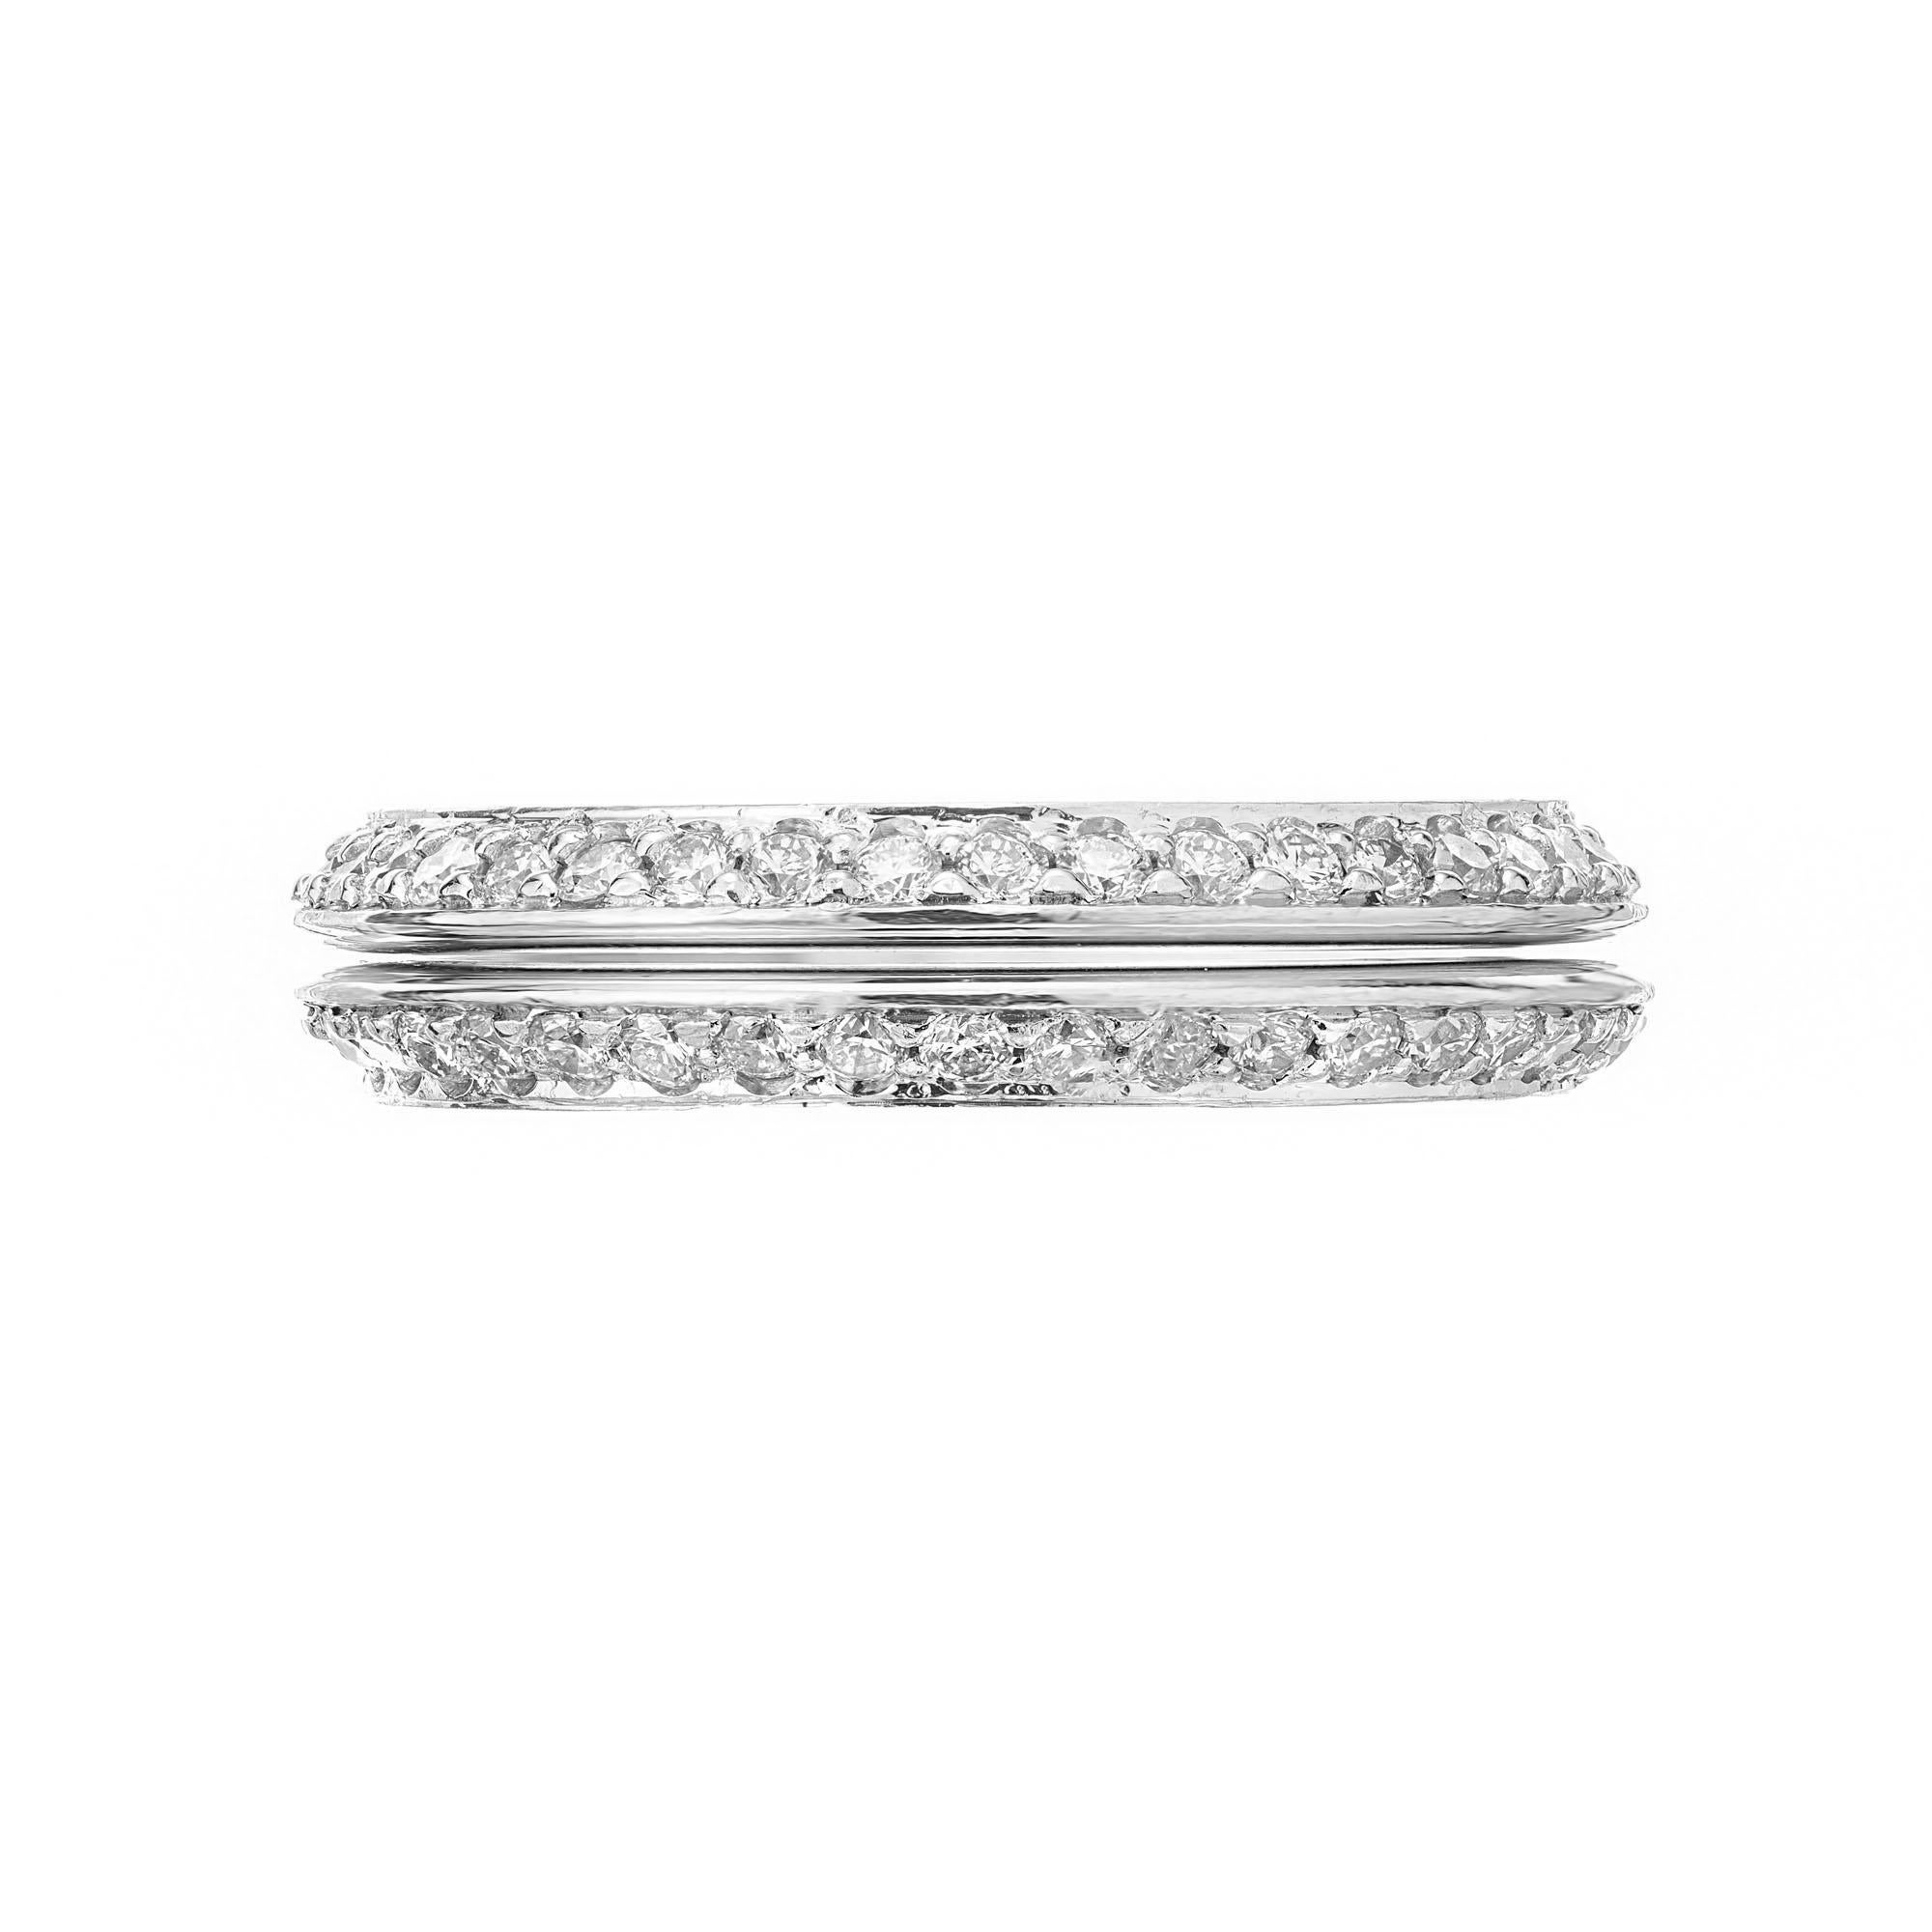 Diamond wedding double band ring. 76 round brilliant cut diamonds approx. total weight 1.68cts in 14k white gold.

76 round brilliant cut Diamonds, approx. total weight .56cts, H – I, SI, 1.1mm per ring. There are 38 diamonds in each ring .28cts